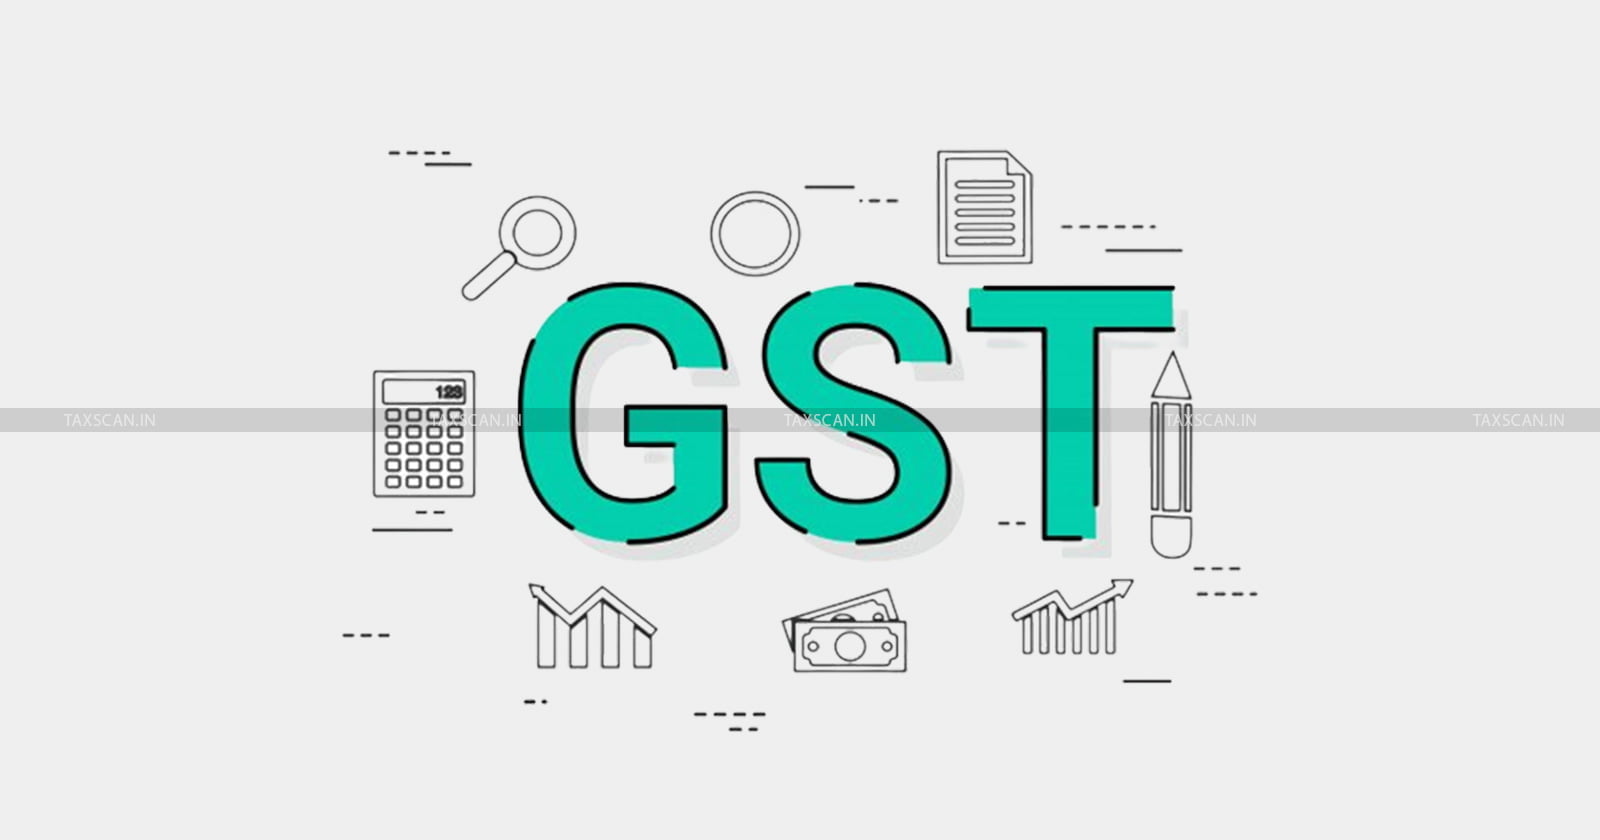 Assessee - Order - GST Amount - GST Authorities - Tribunal - Patna High Court - Appeal - BGST Act - Taxscan